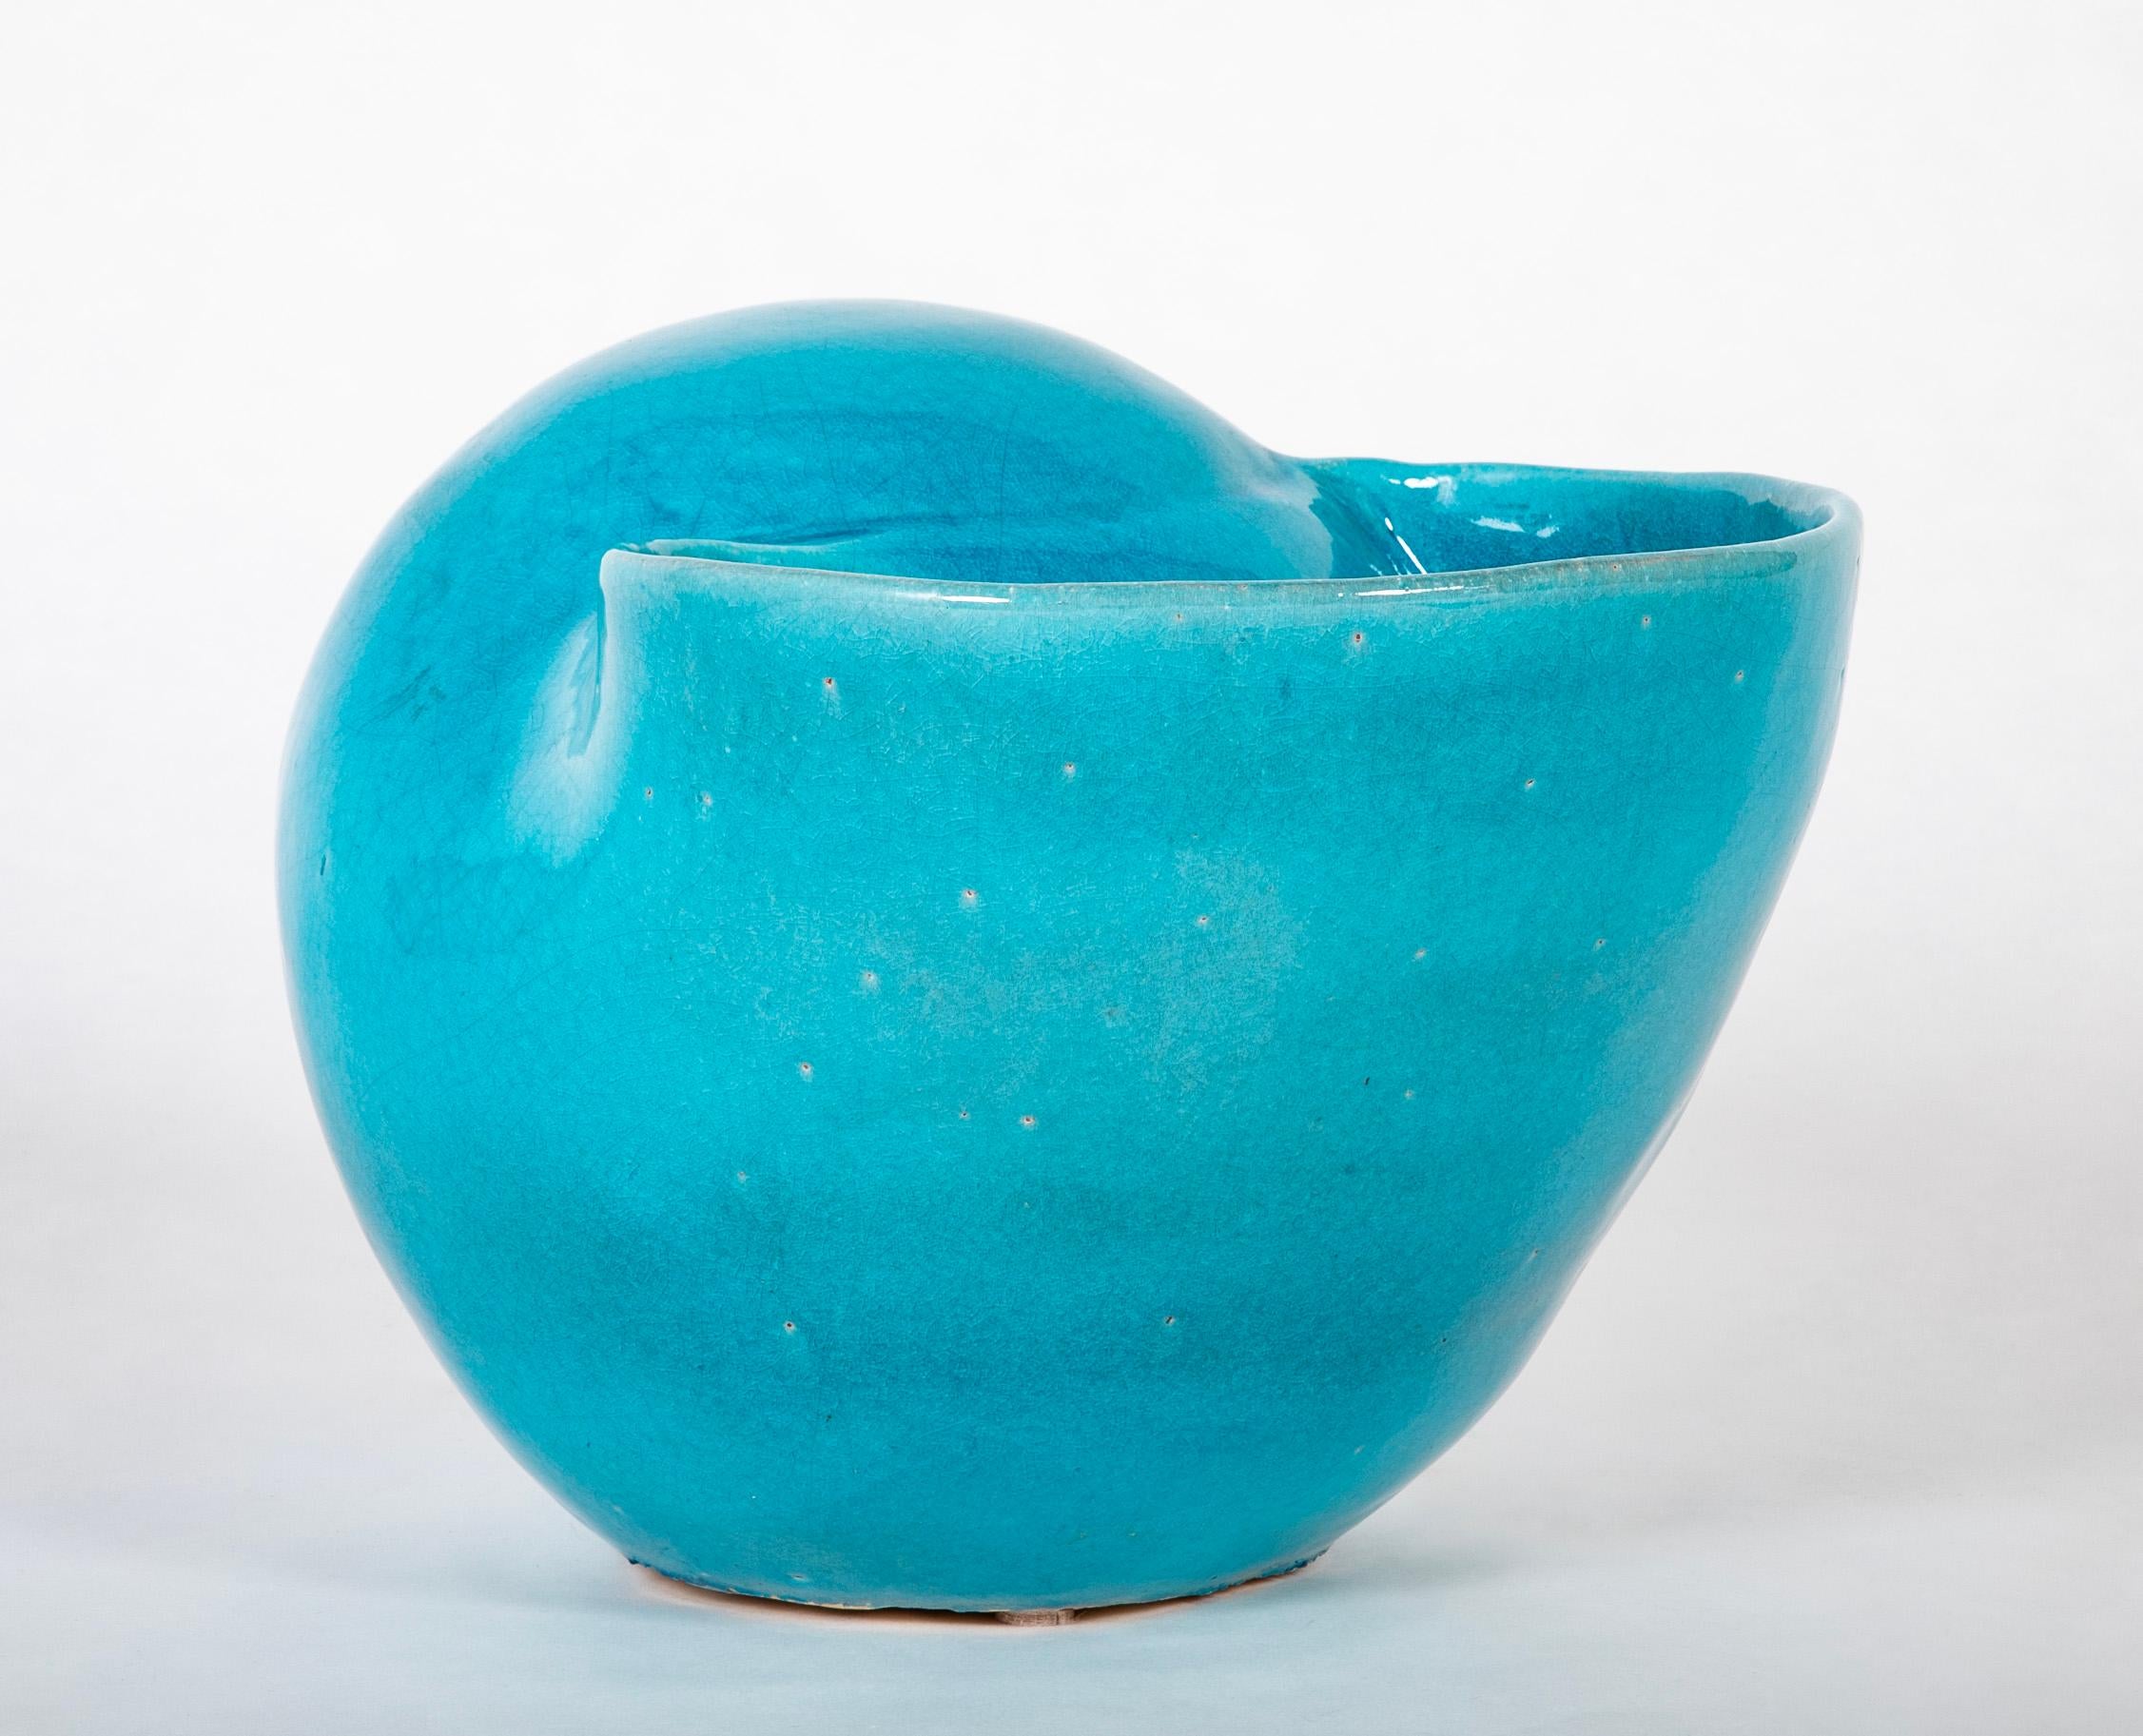 Turquoise Blue Glazed Sea Shell Vase Jardiniere Planter, Large Scale For Sale 8